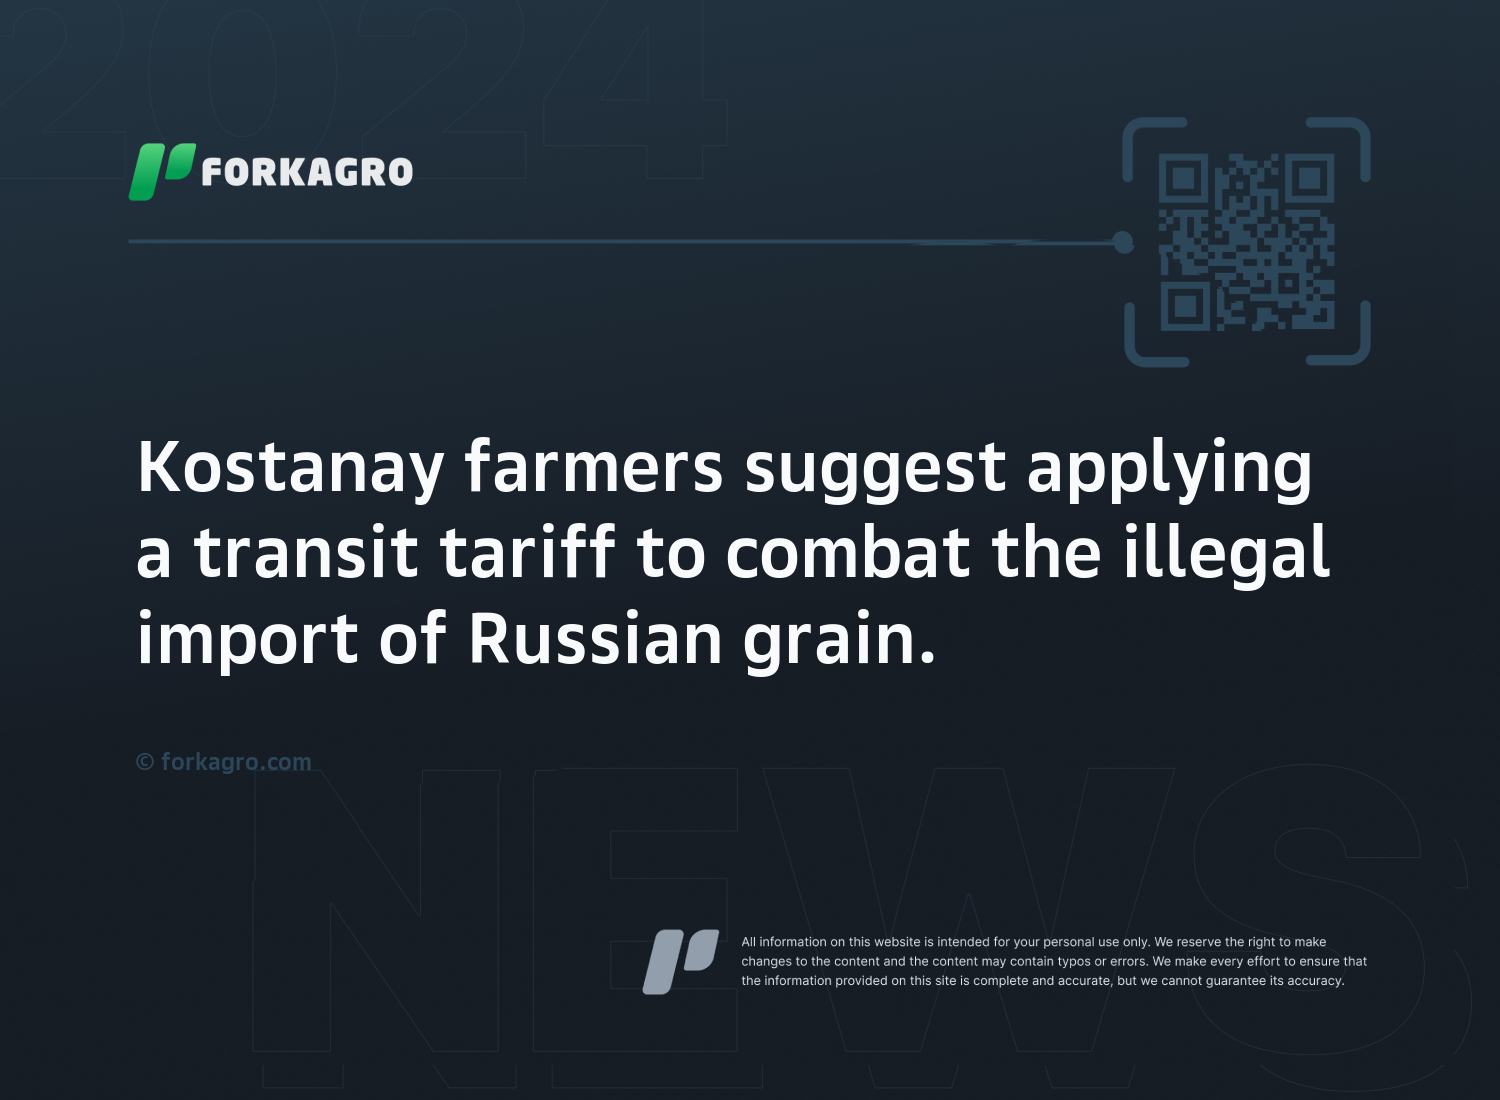 Kostanay farmers suggest applying a transit tariff to combat the illegal import of Russian grain.